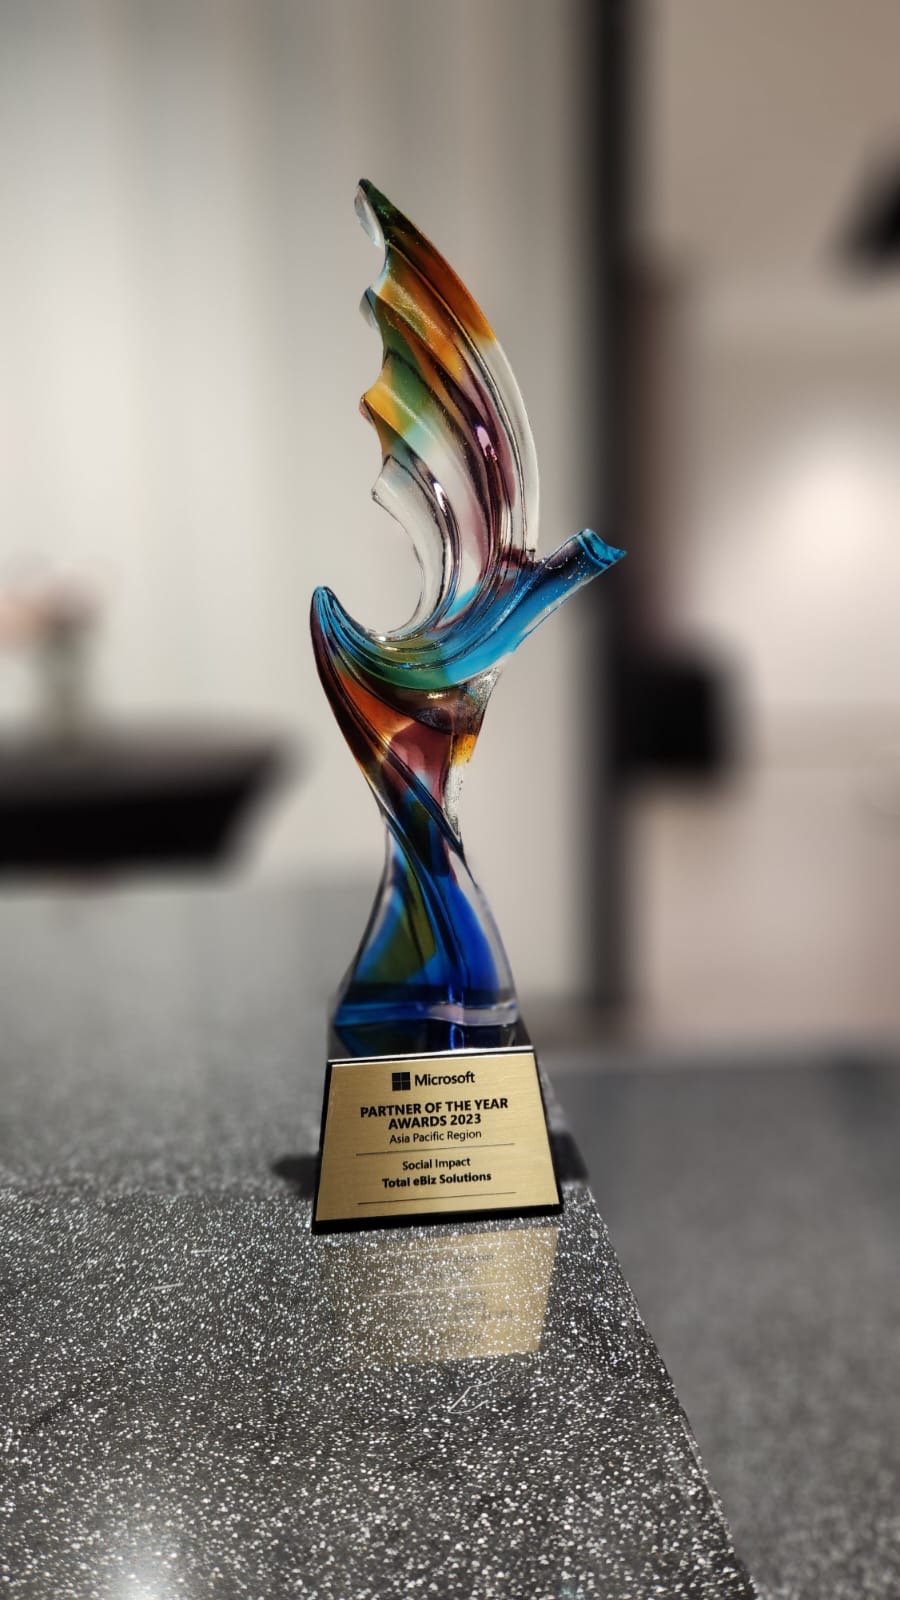 The trophy awarded to Total eBiz Solutions, symbolizing their achievement as the Microsoft Asia Pacific Region Partner of the Year 2023 for Social Impact.